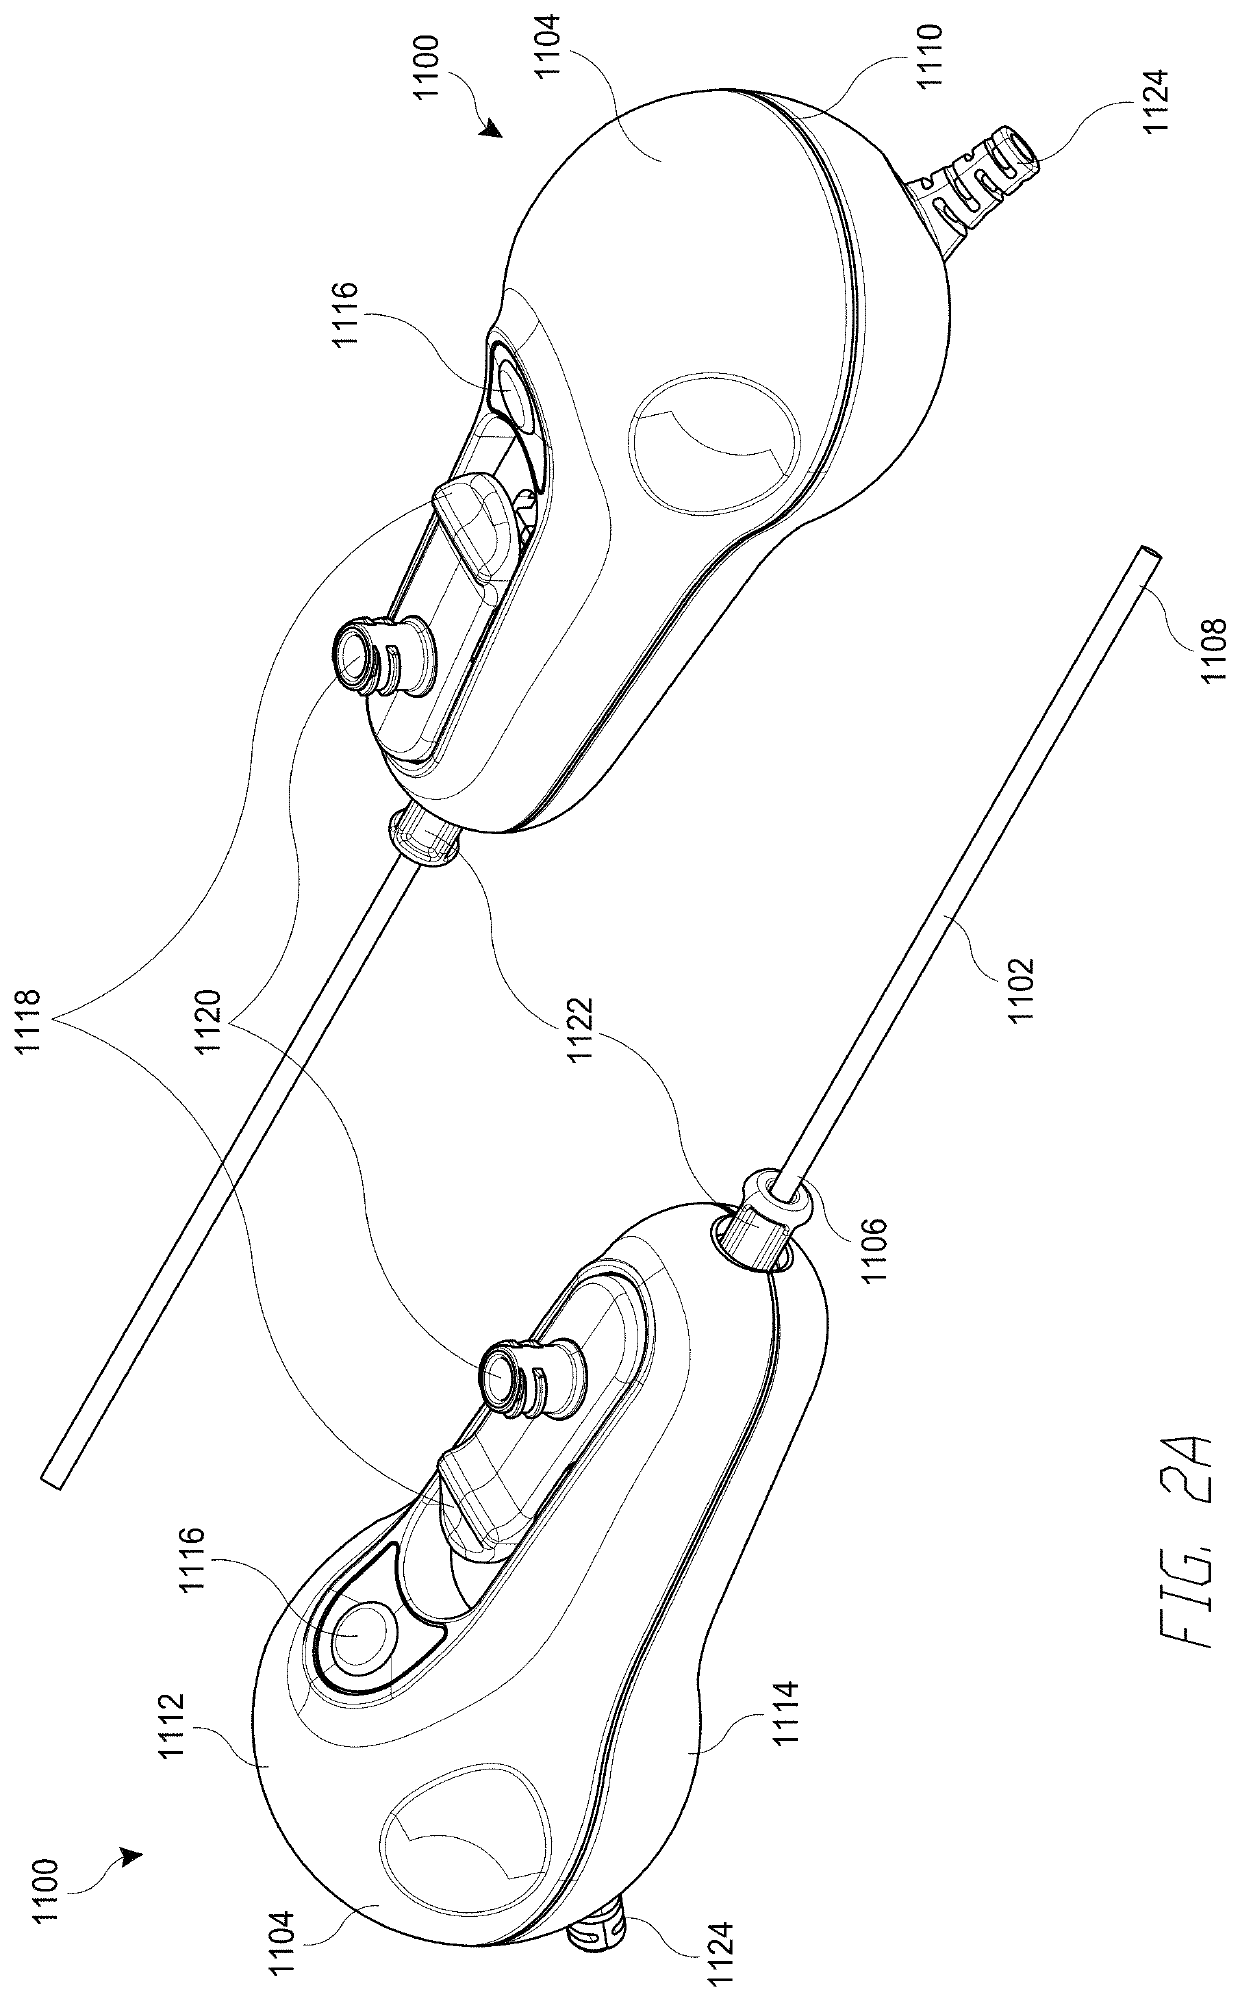 Clot evacuation and visualization devices and methods of use